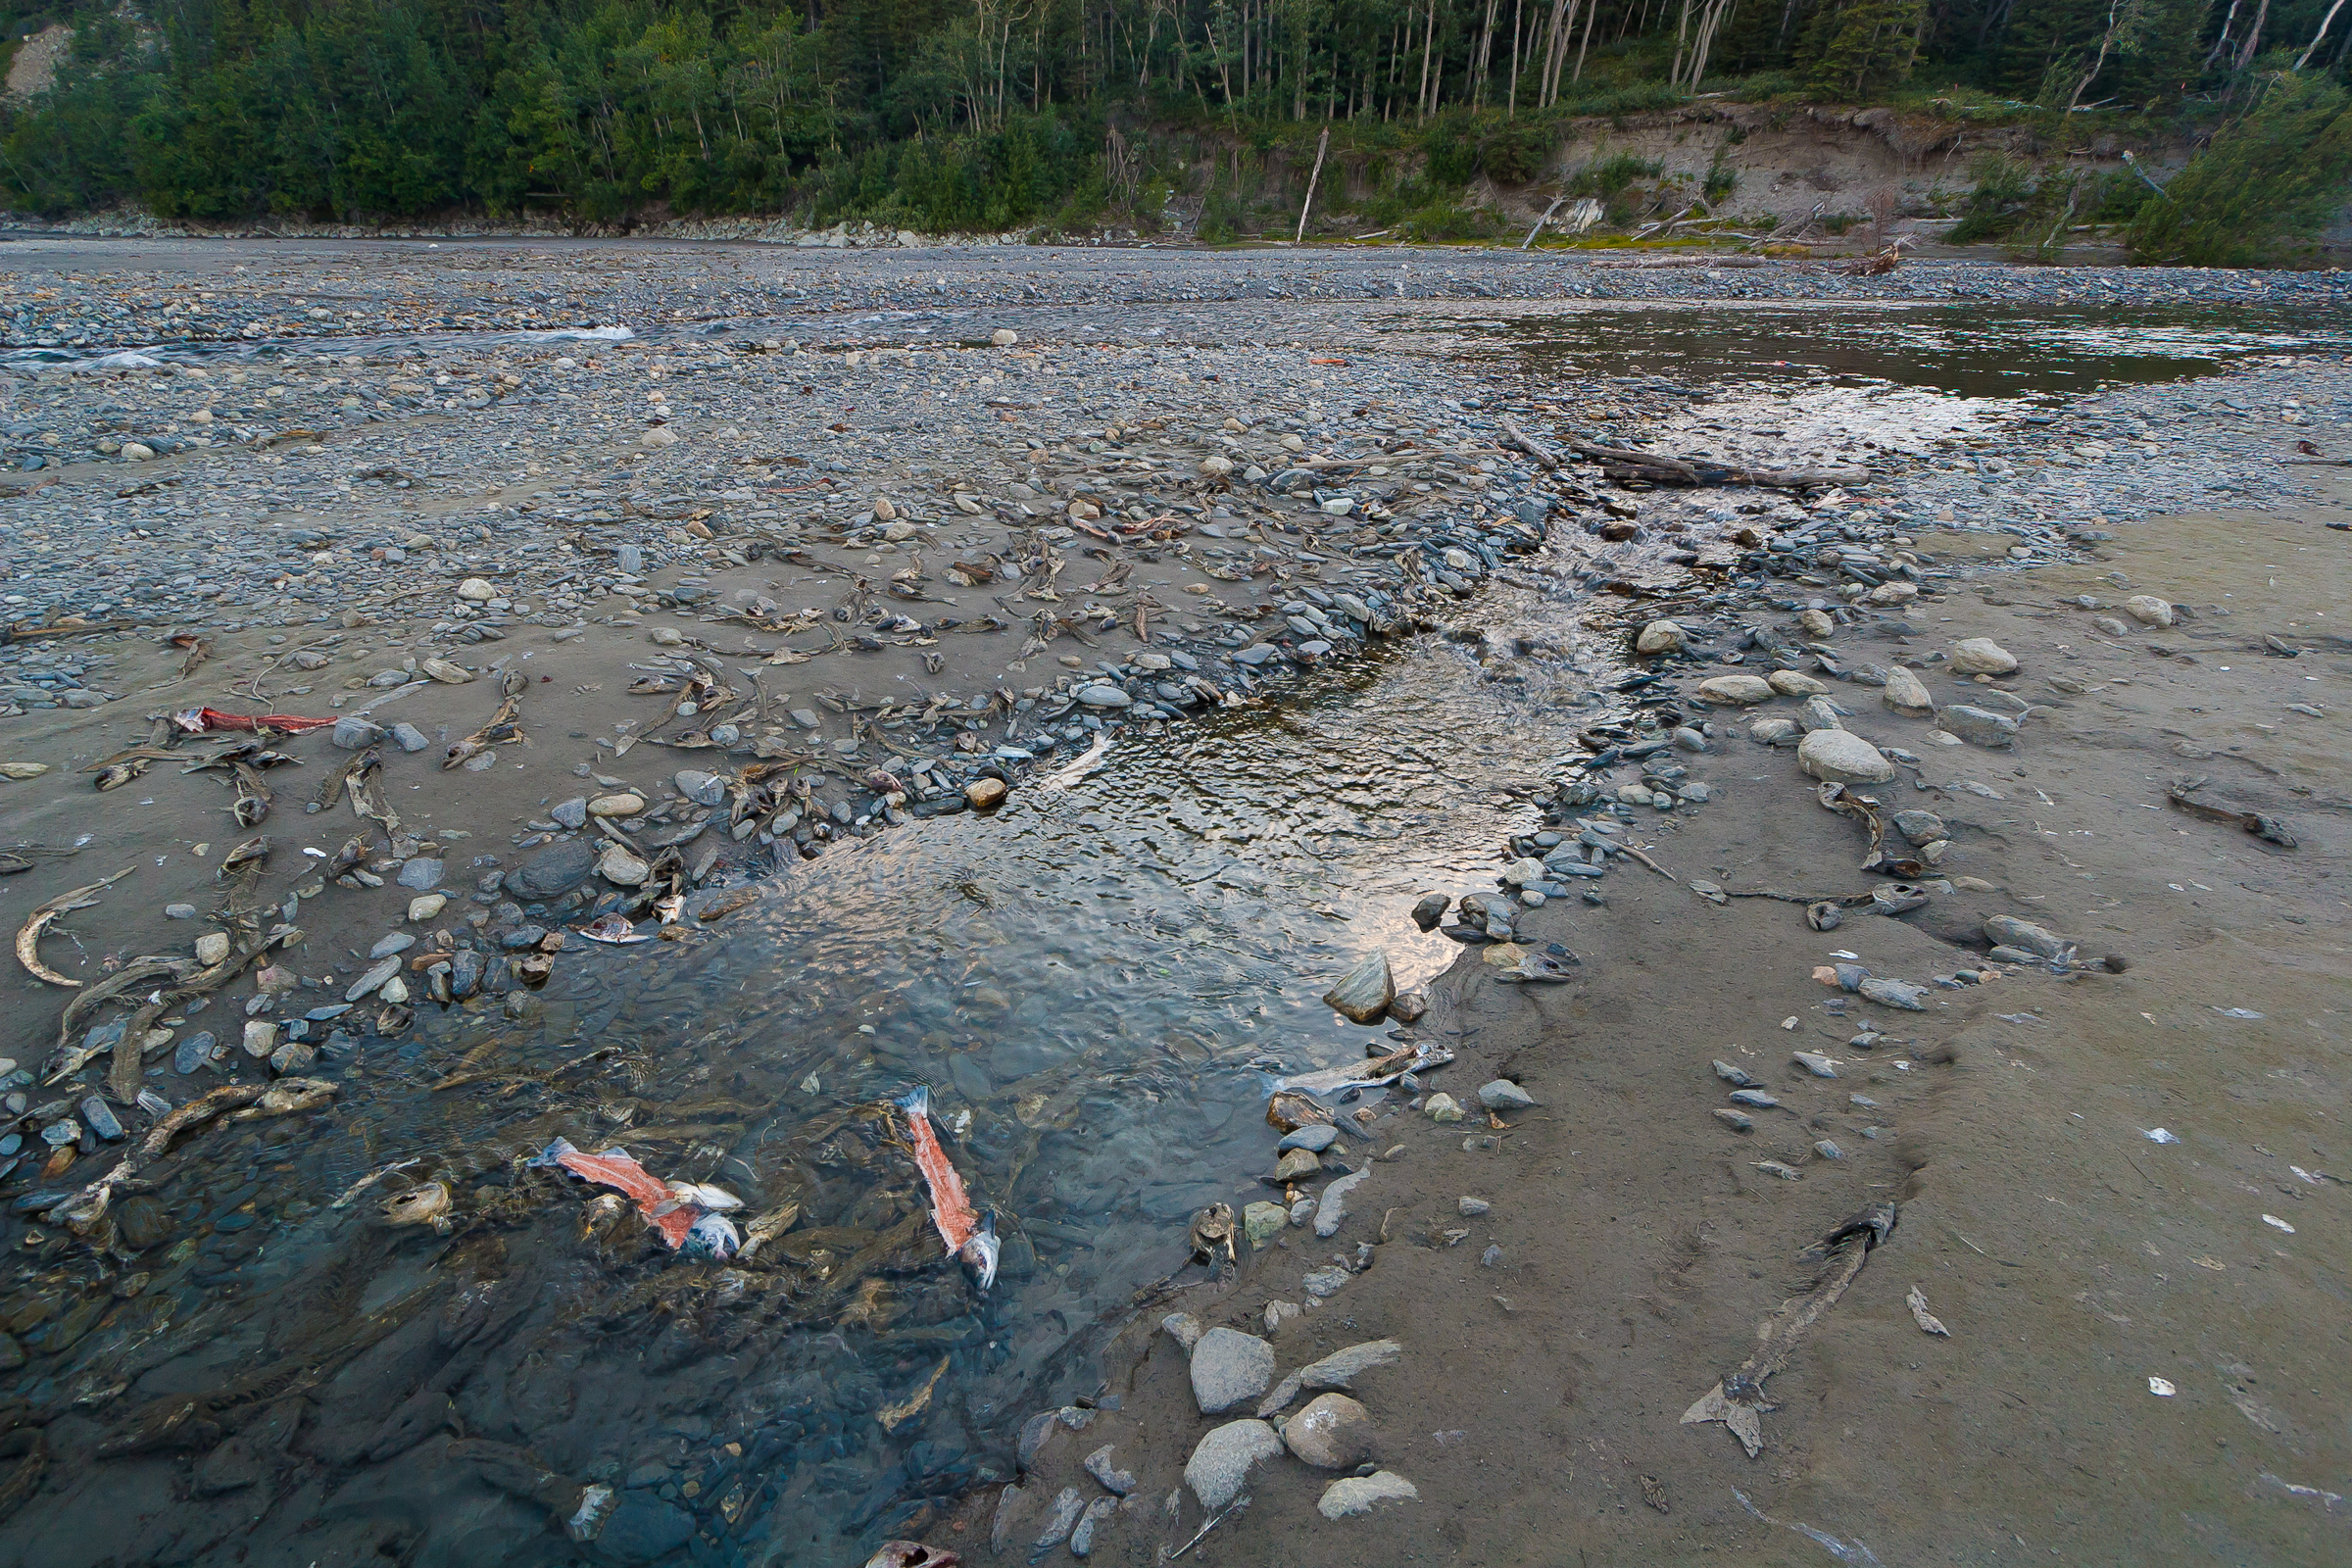 This is the delta where O'Brien Creek flows out into the Copper River's channel.  It may be one of the most intense graveyards for filleted salmon in the world. From the Copper River in Alaska.